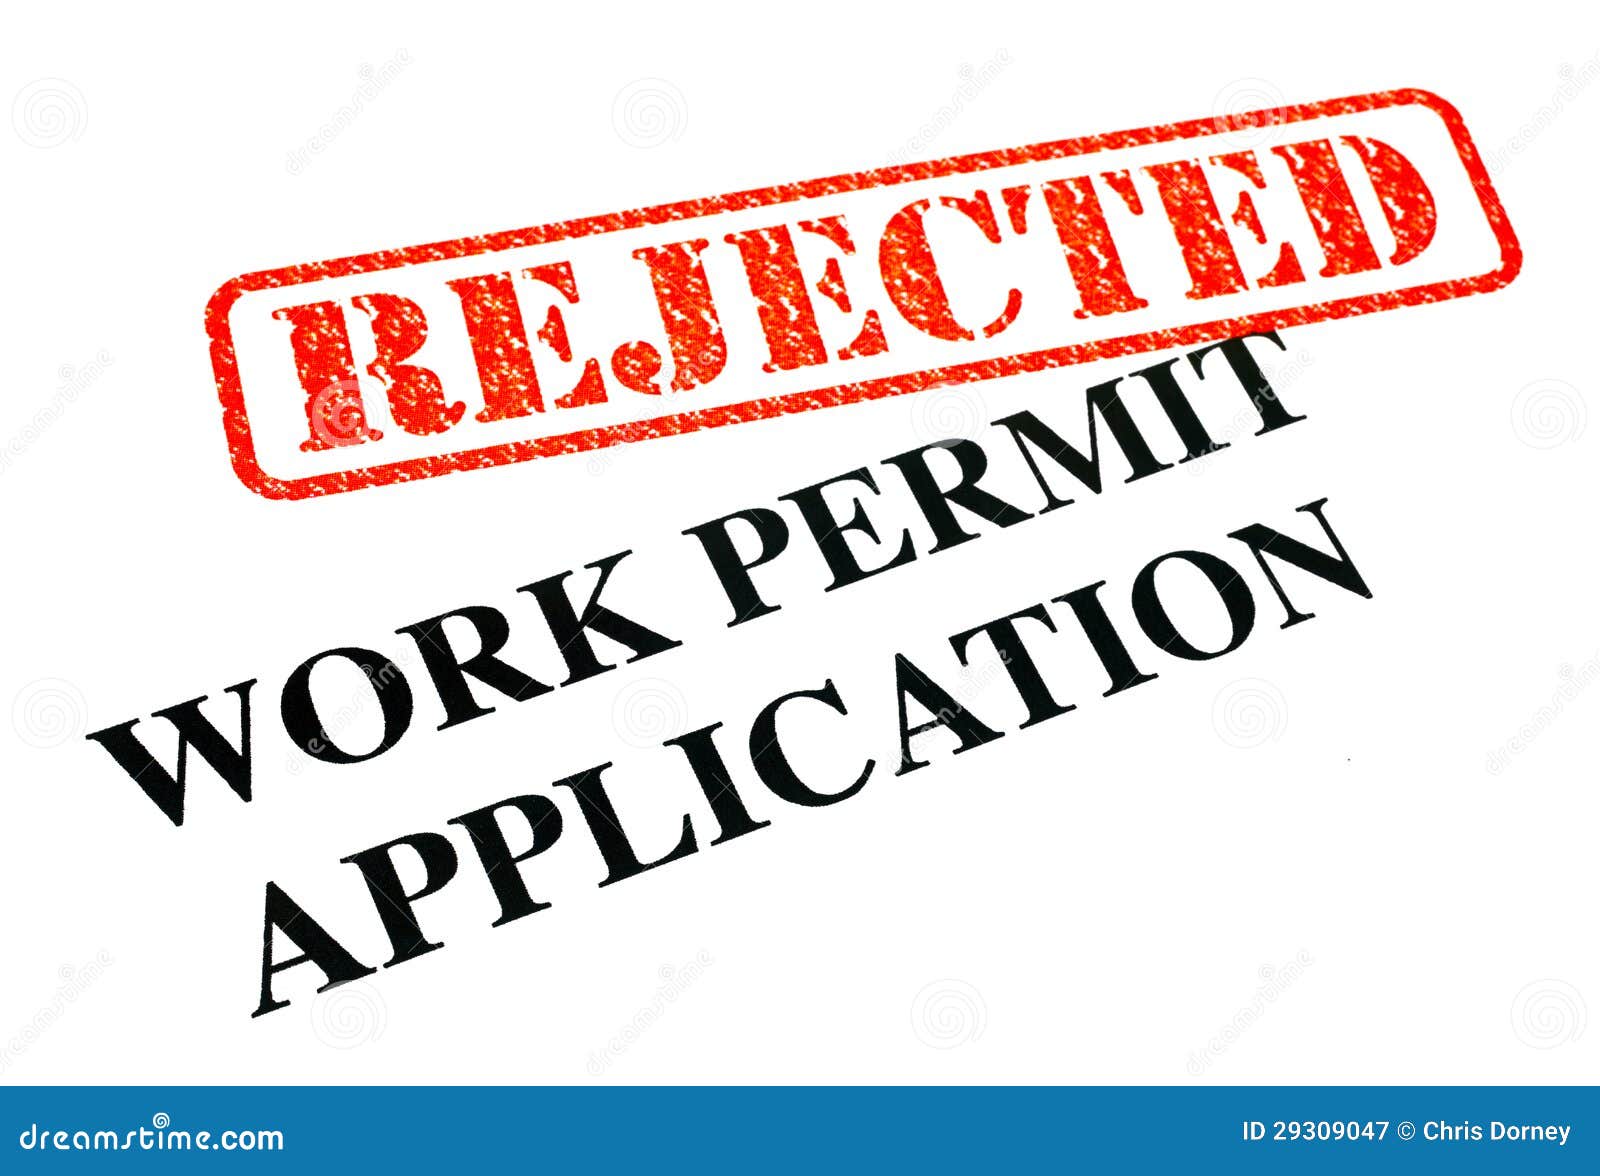 employment pass rejected